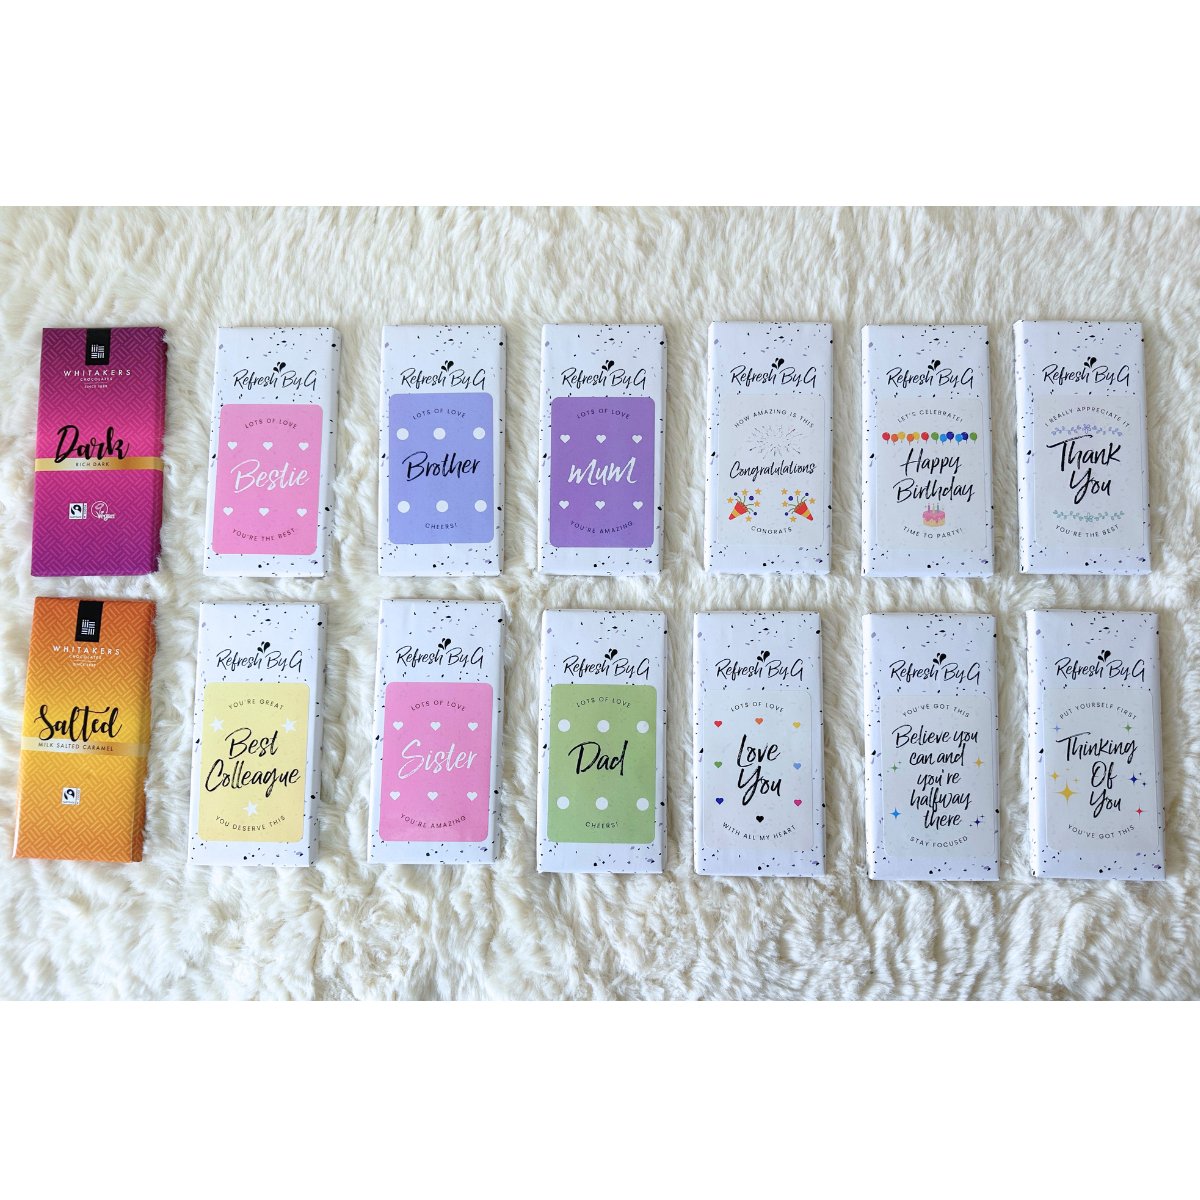 Range of chocolate bars which customers can choose from when they order the Ladies &